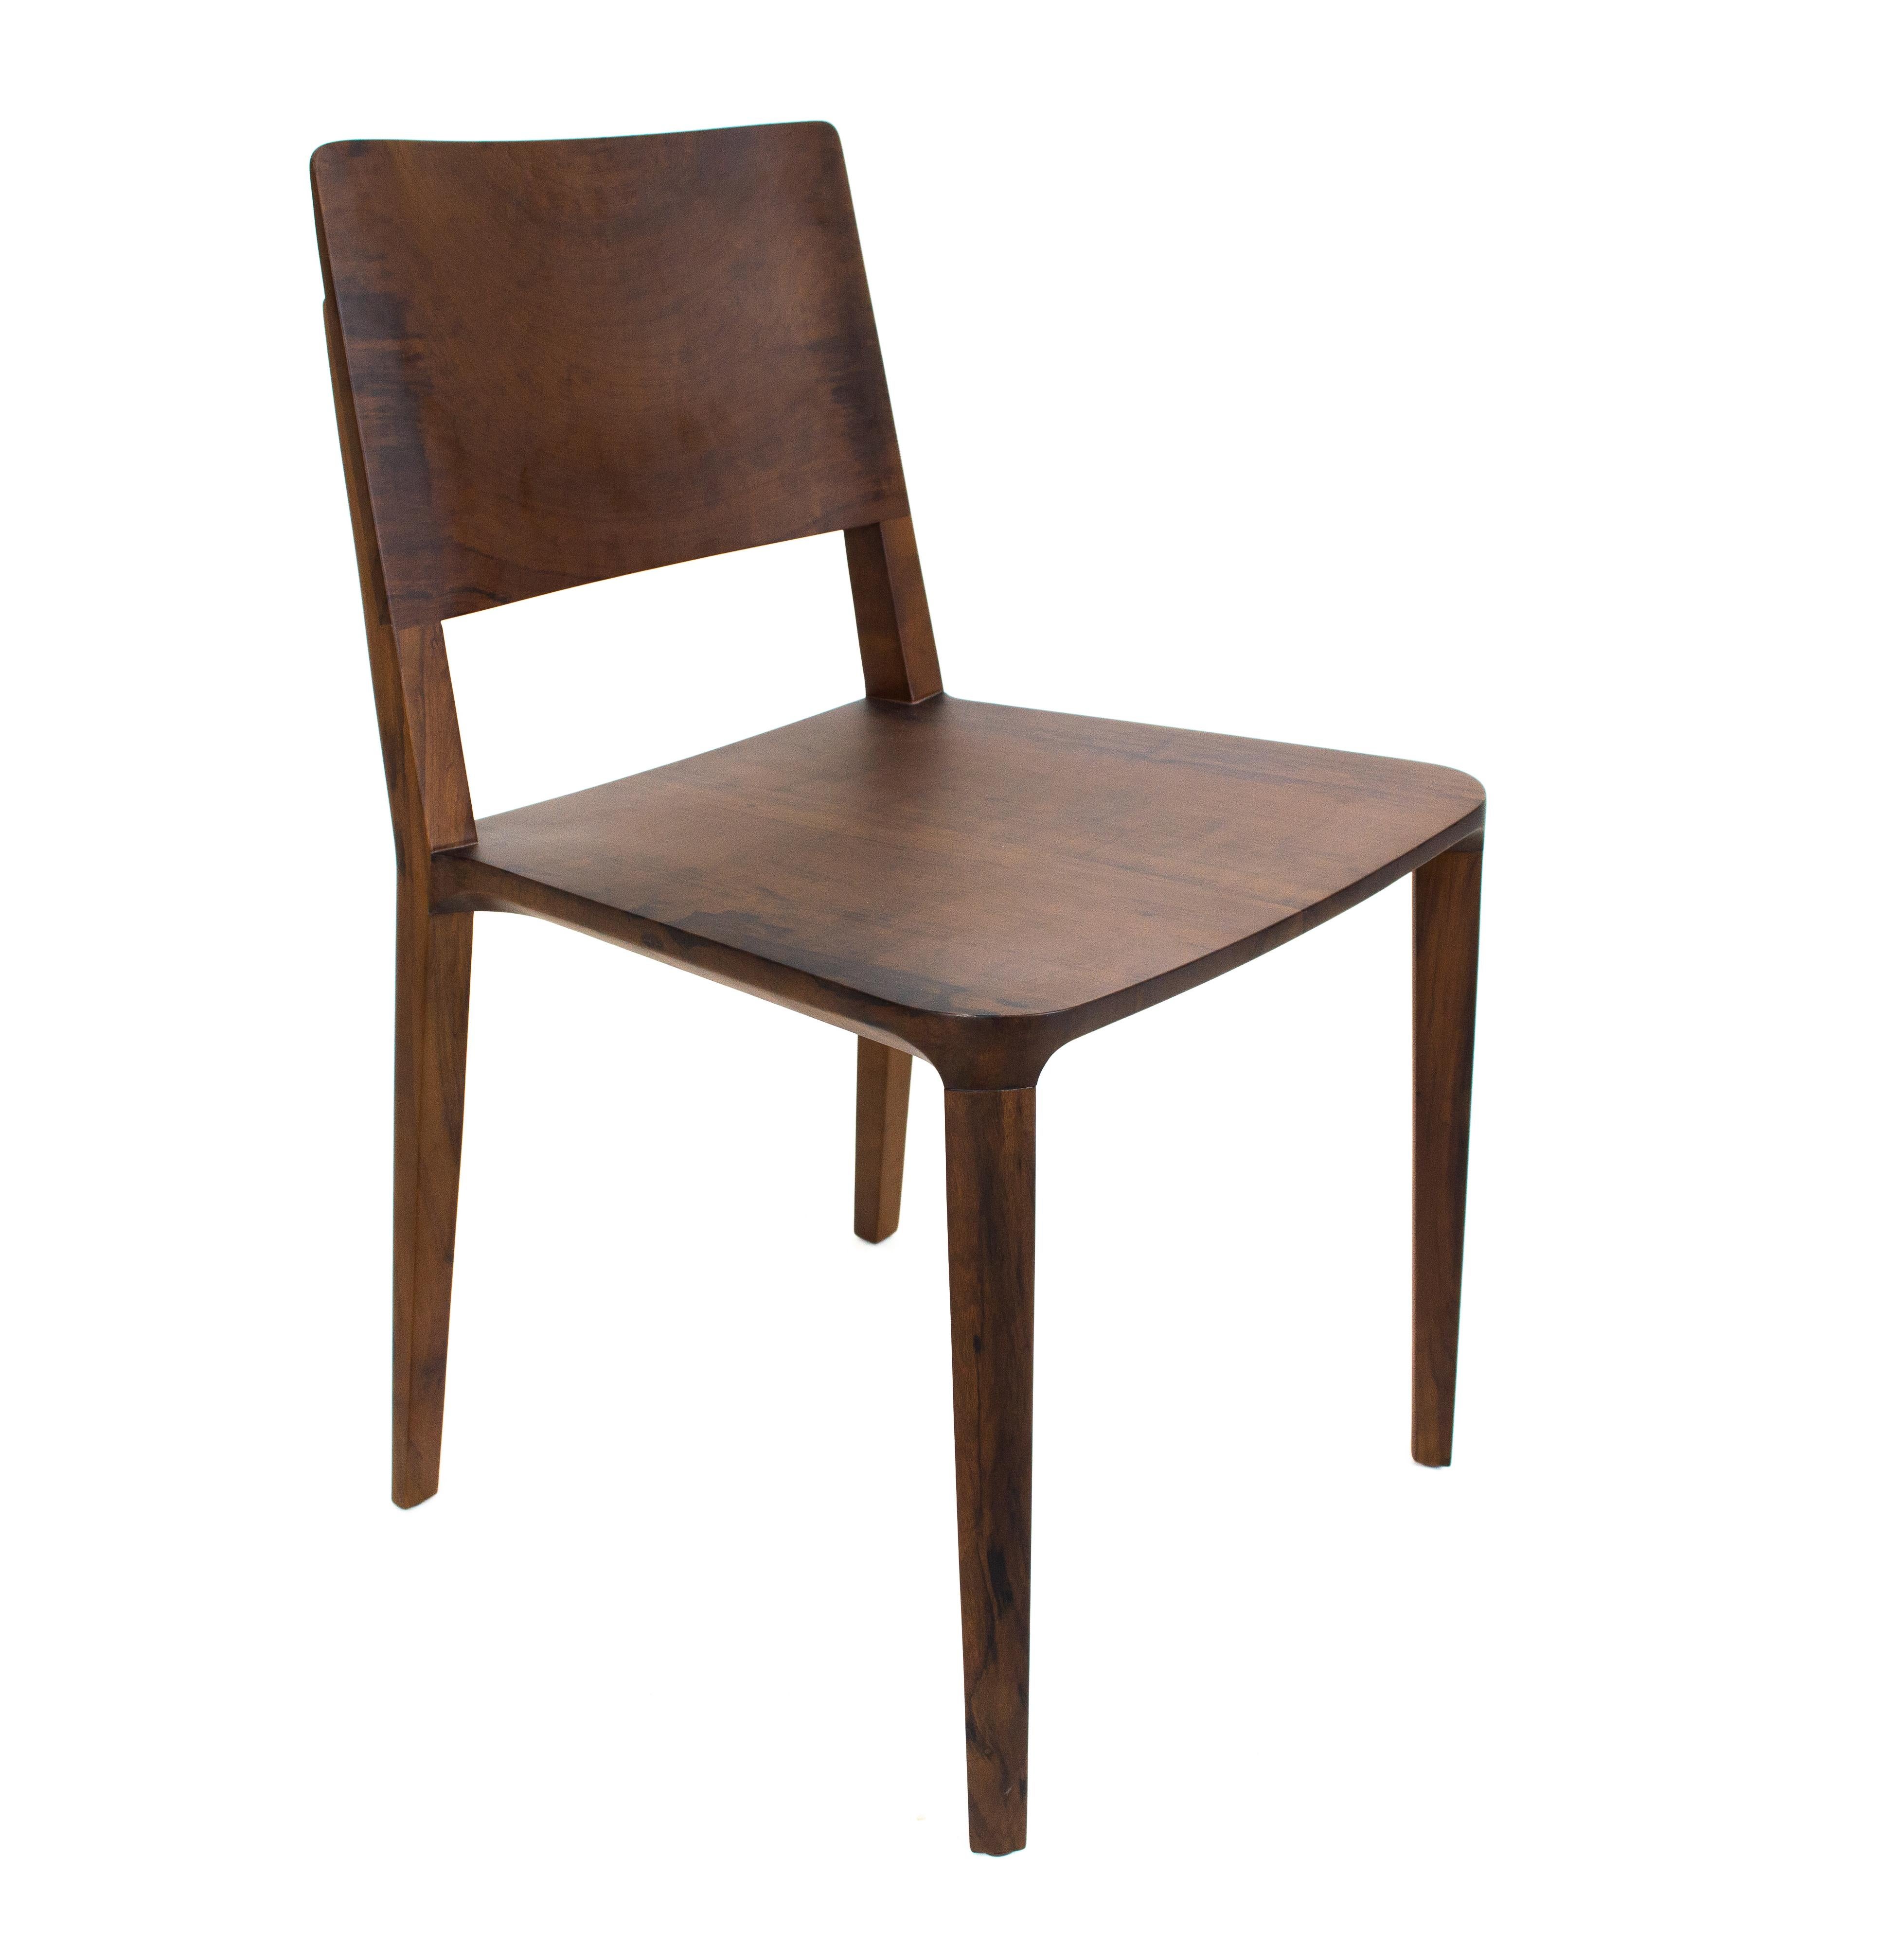 Minimalist Chair in Hardwood Solid Black In New Condition For Sale In Vila Cordeiro, São Paulo